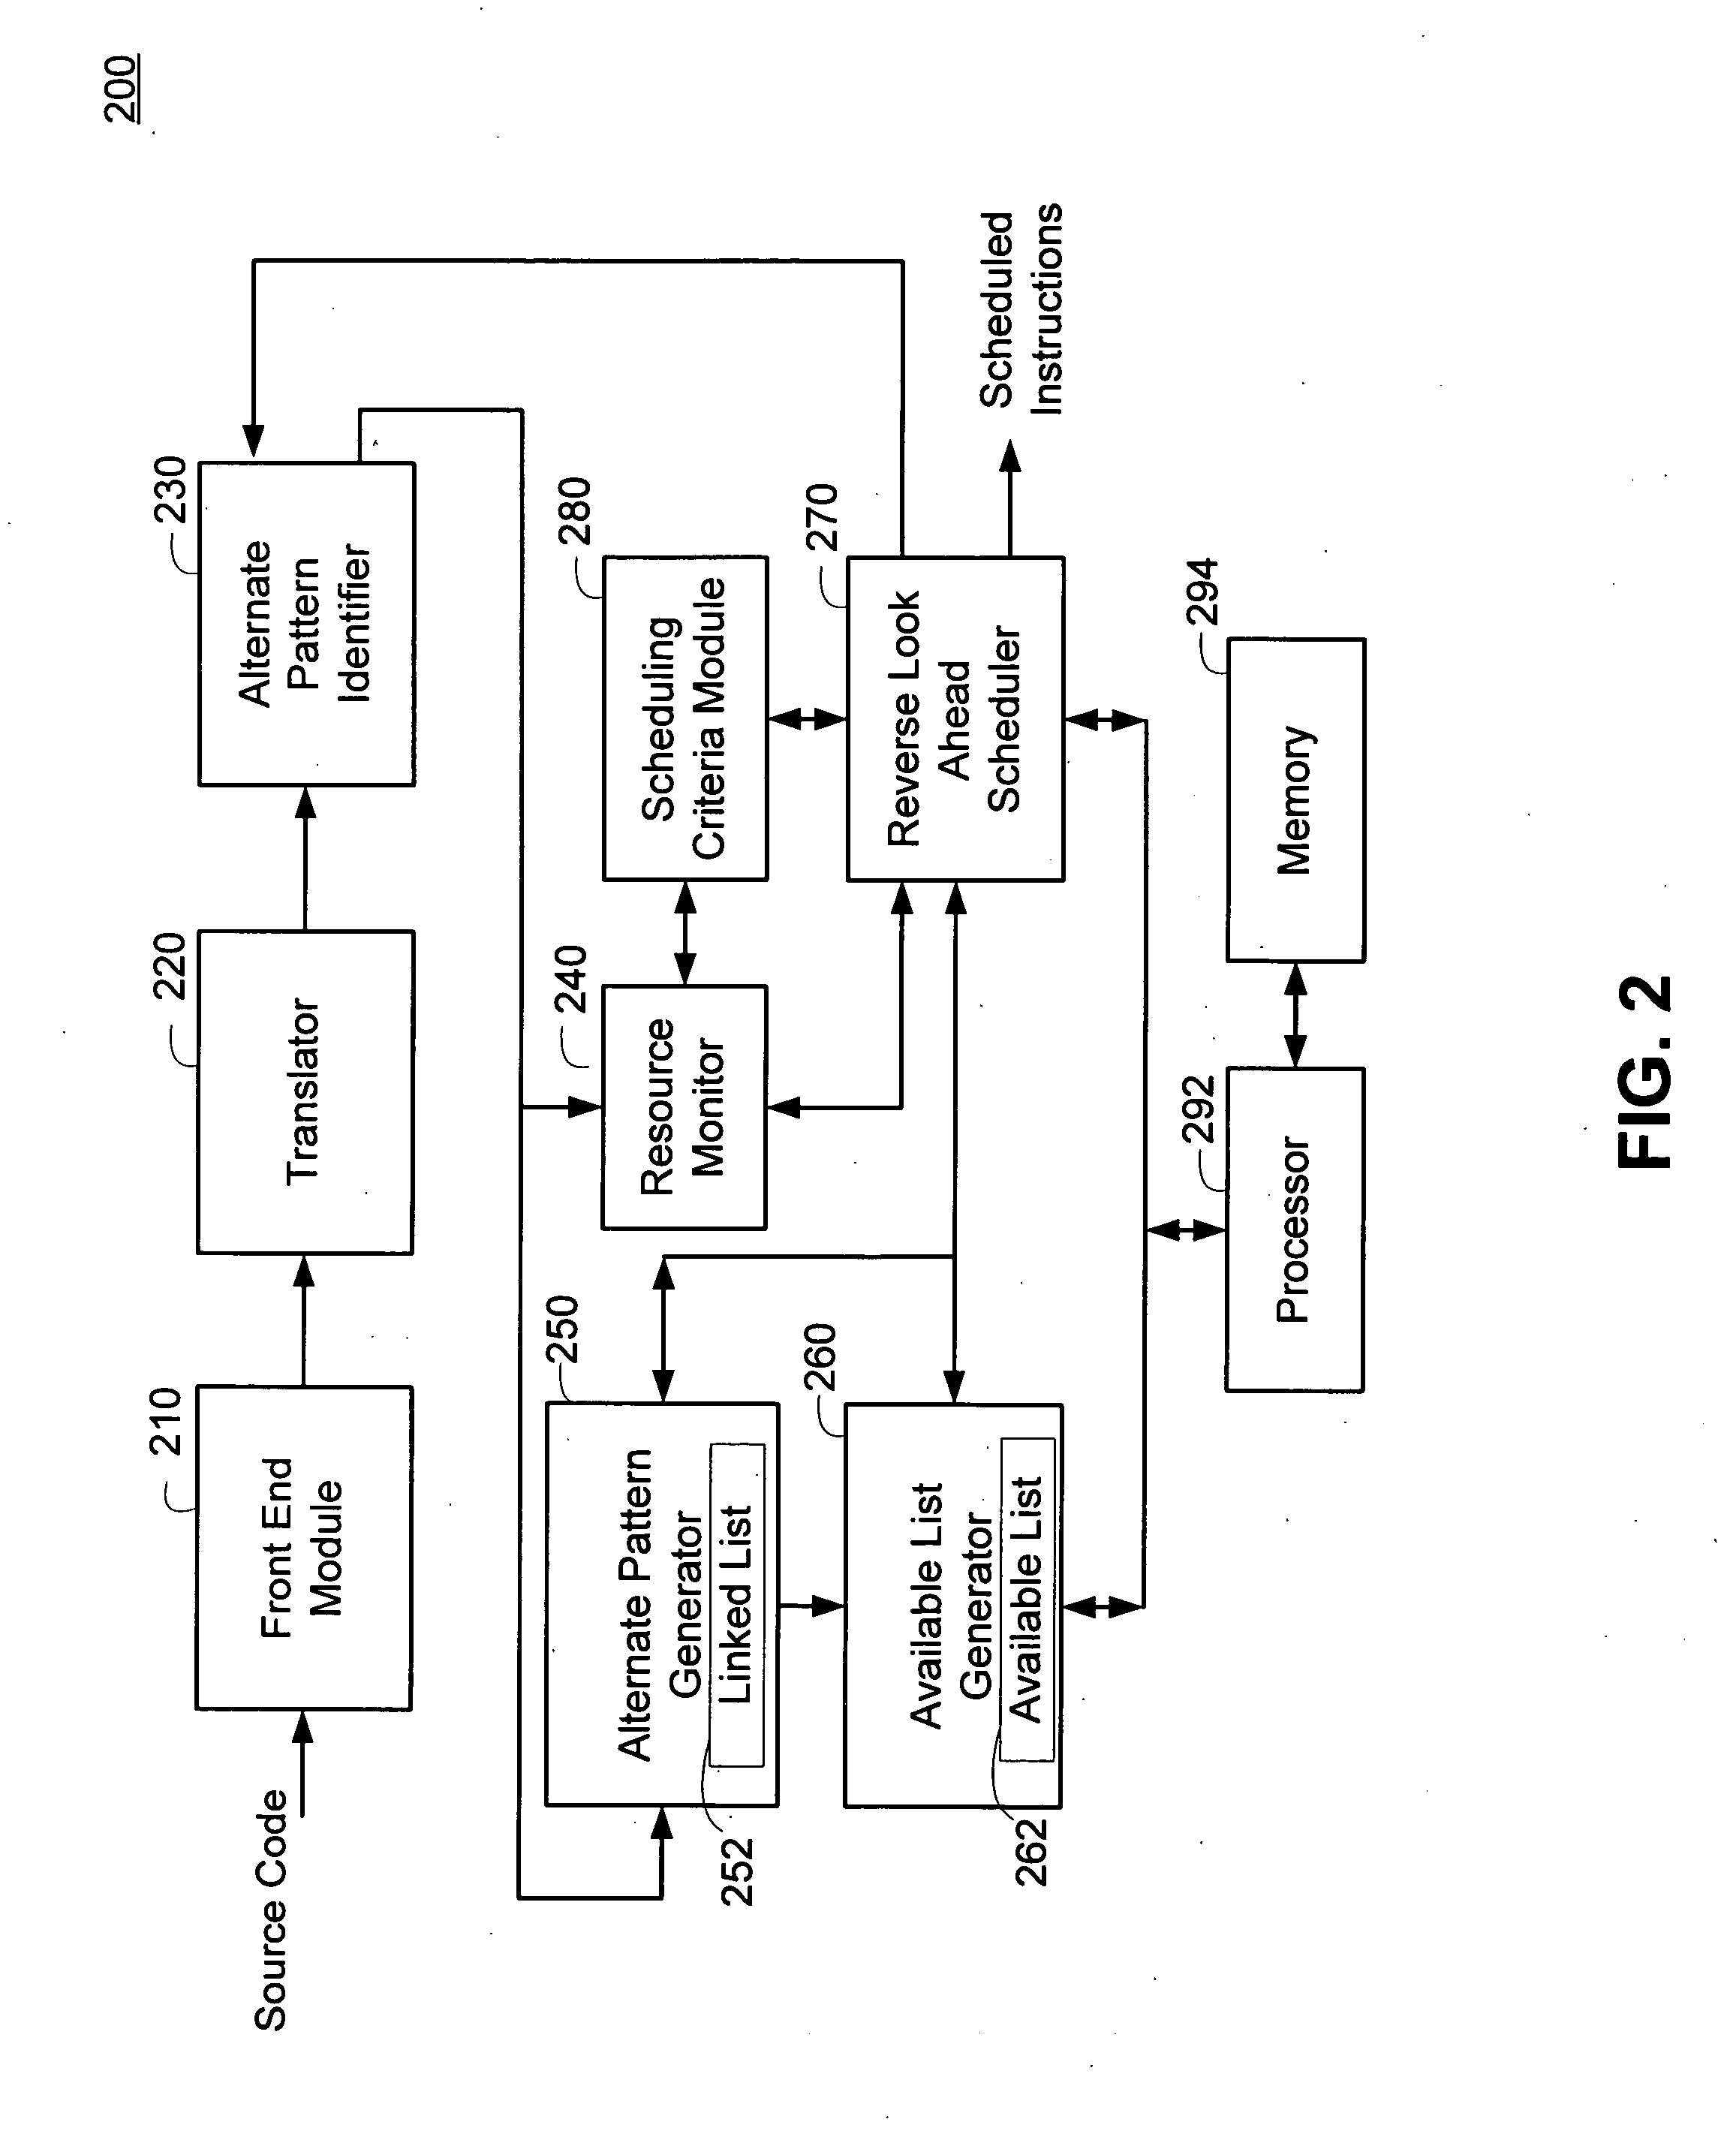 Dynamic instruction sequence selection during scheduling